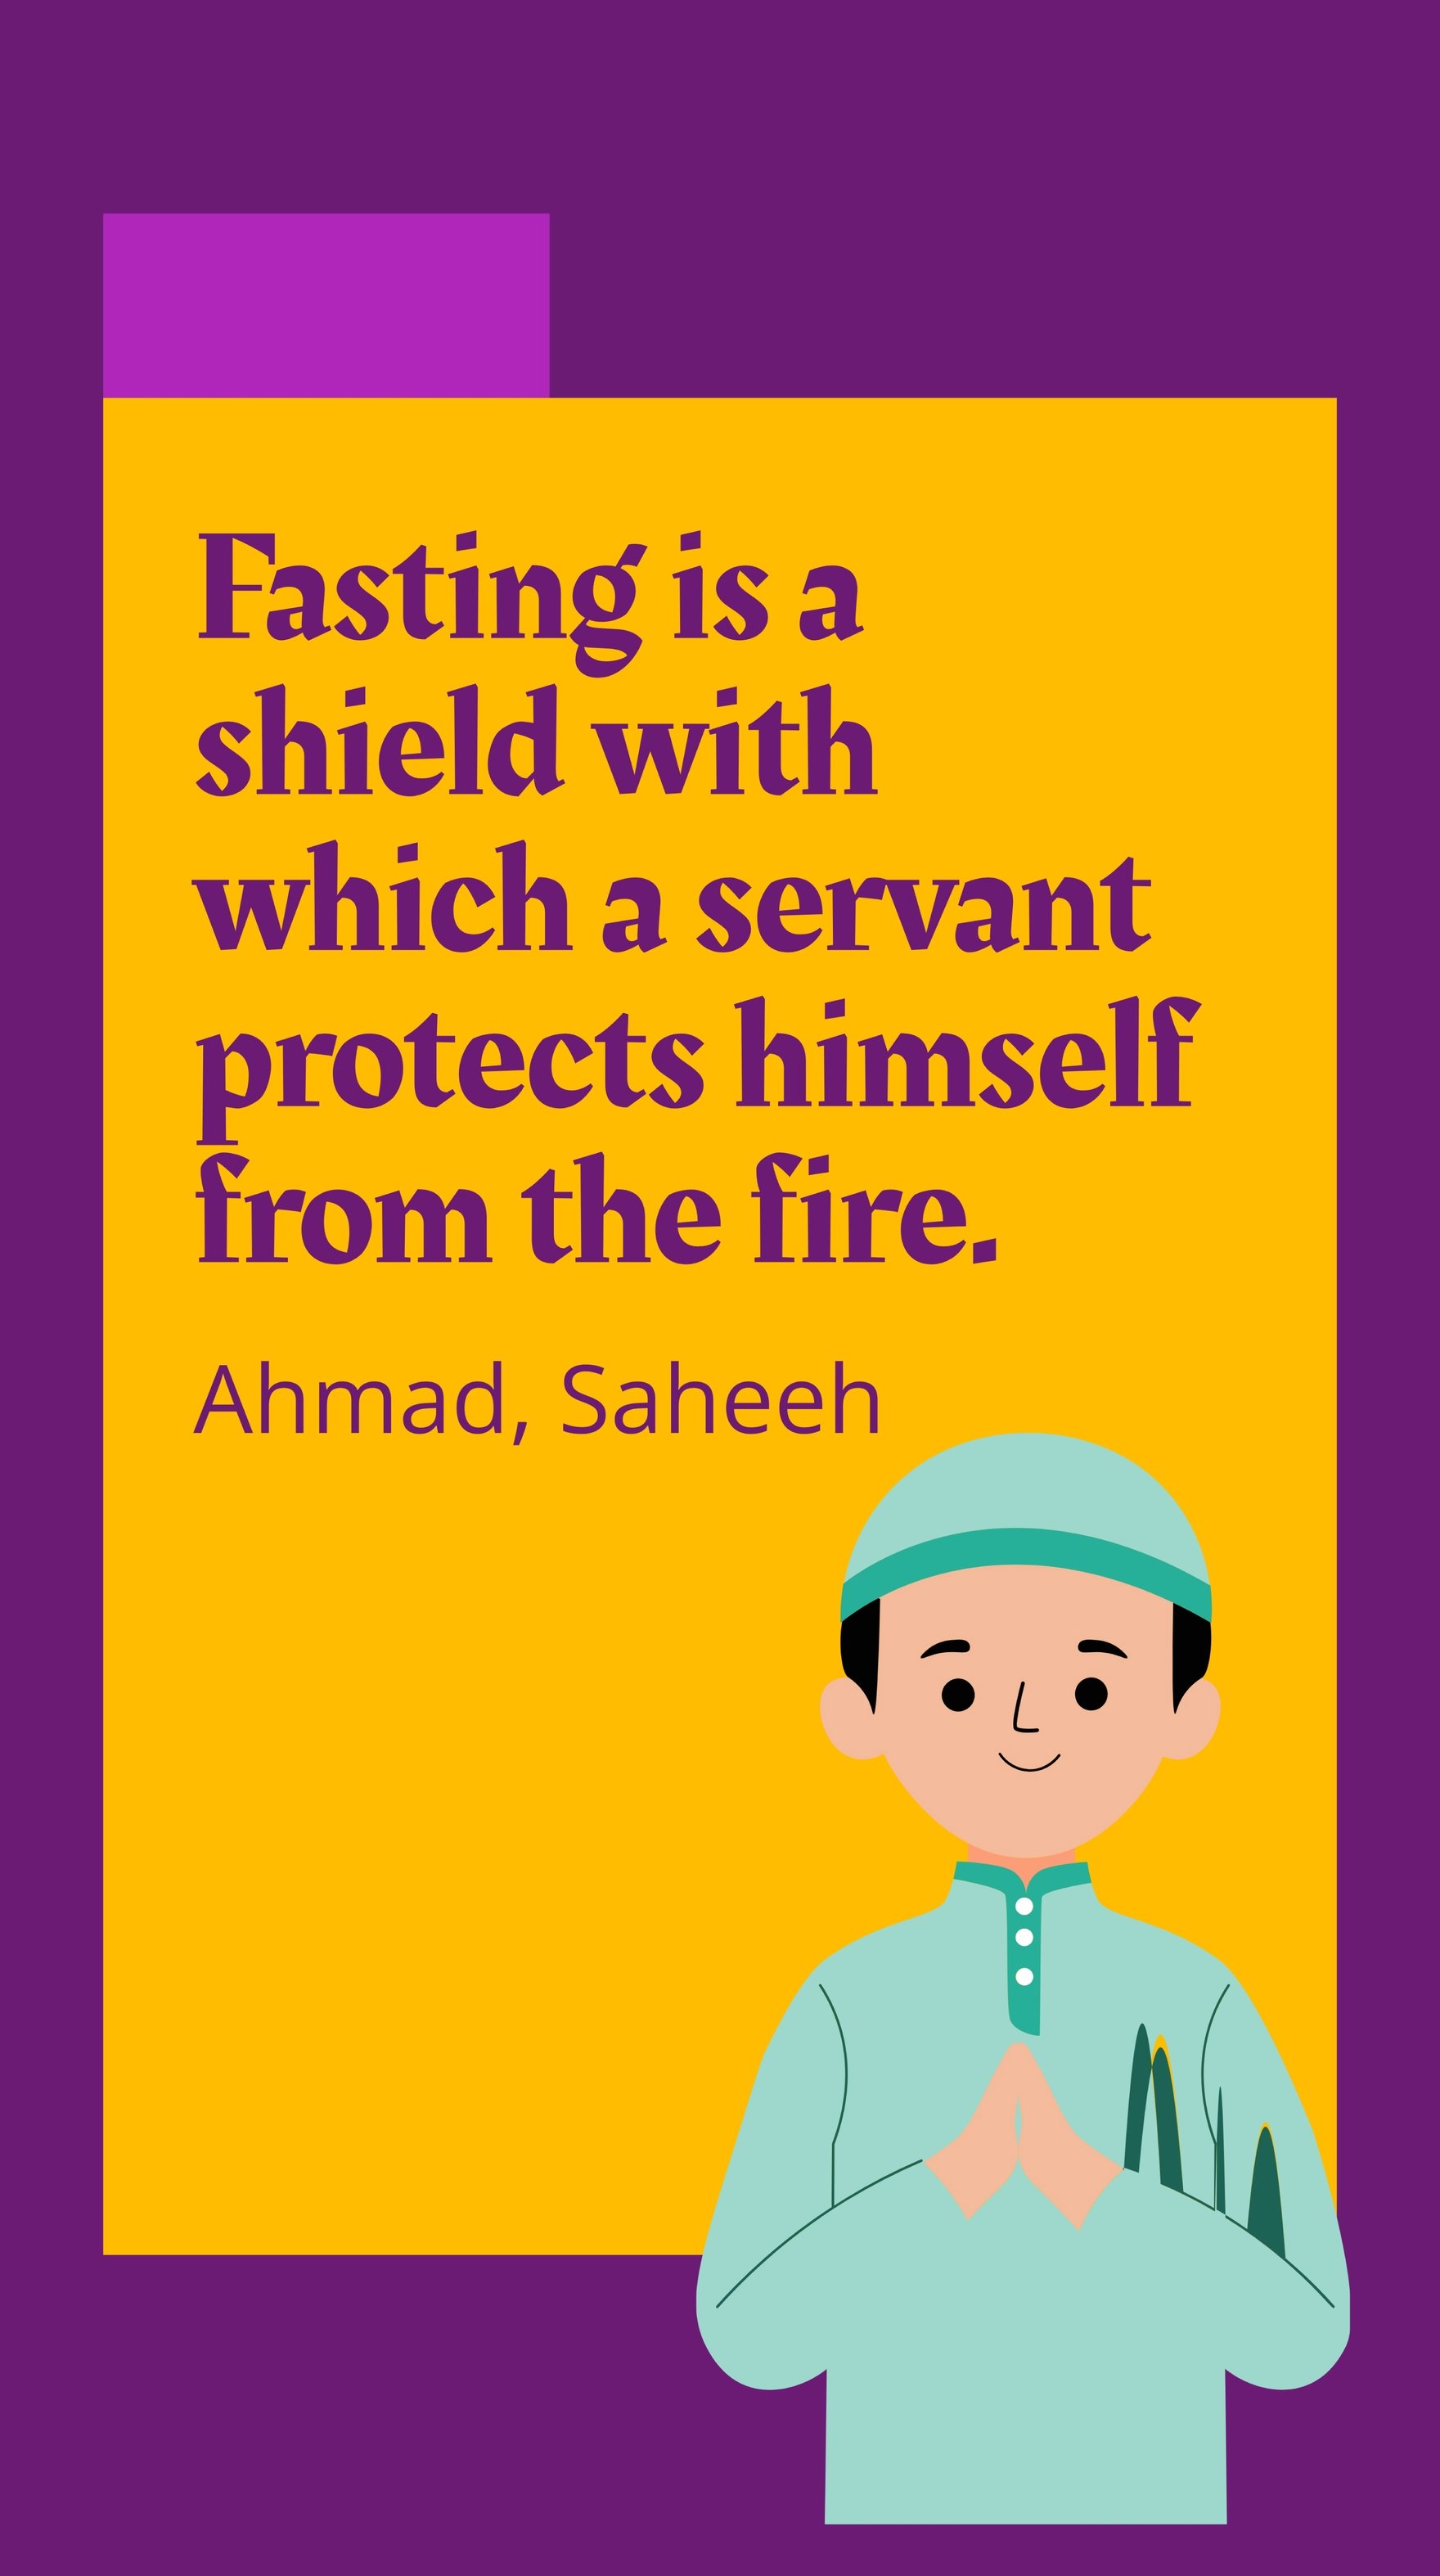 Ahmad, Saheeh - Fasting is a shield with which a servant protects himself from the fire. in JPG